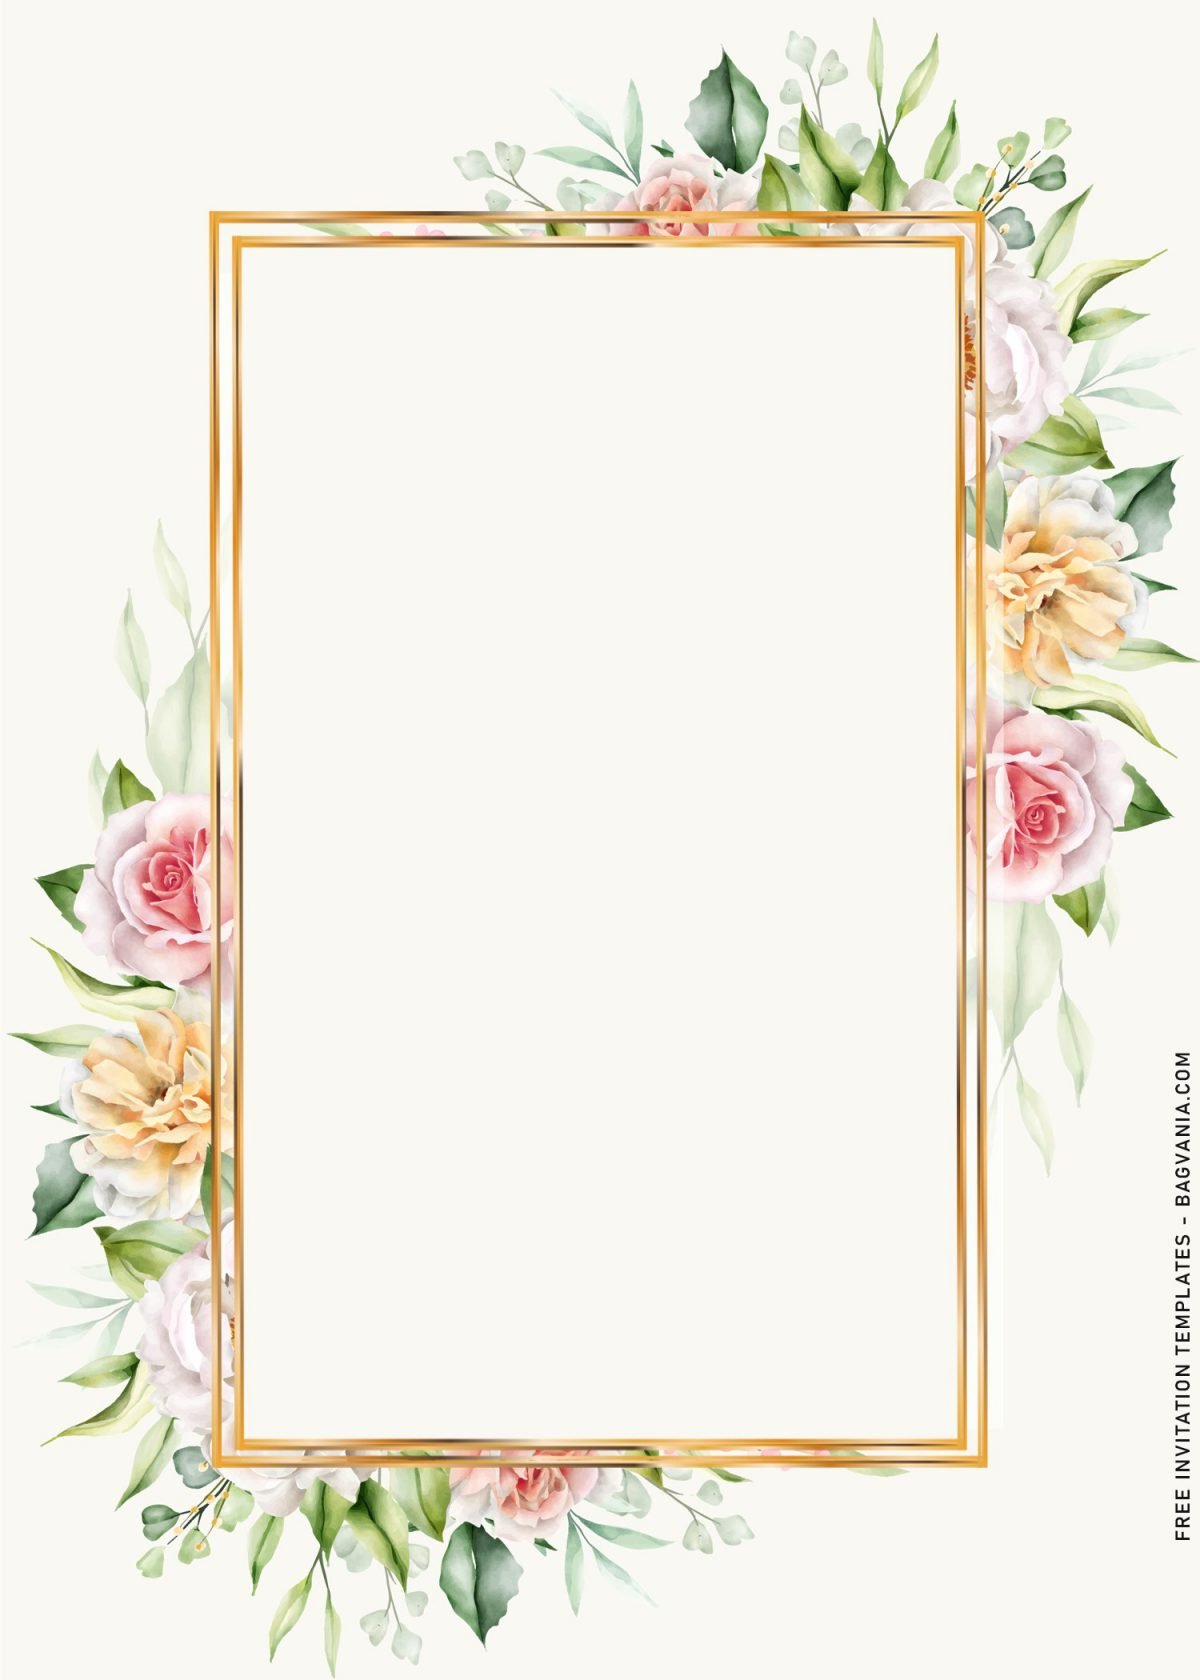 10+ Watercolor Floral Greenery Birthday Invitation Templates with stunning gold frame